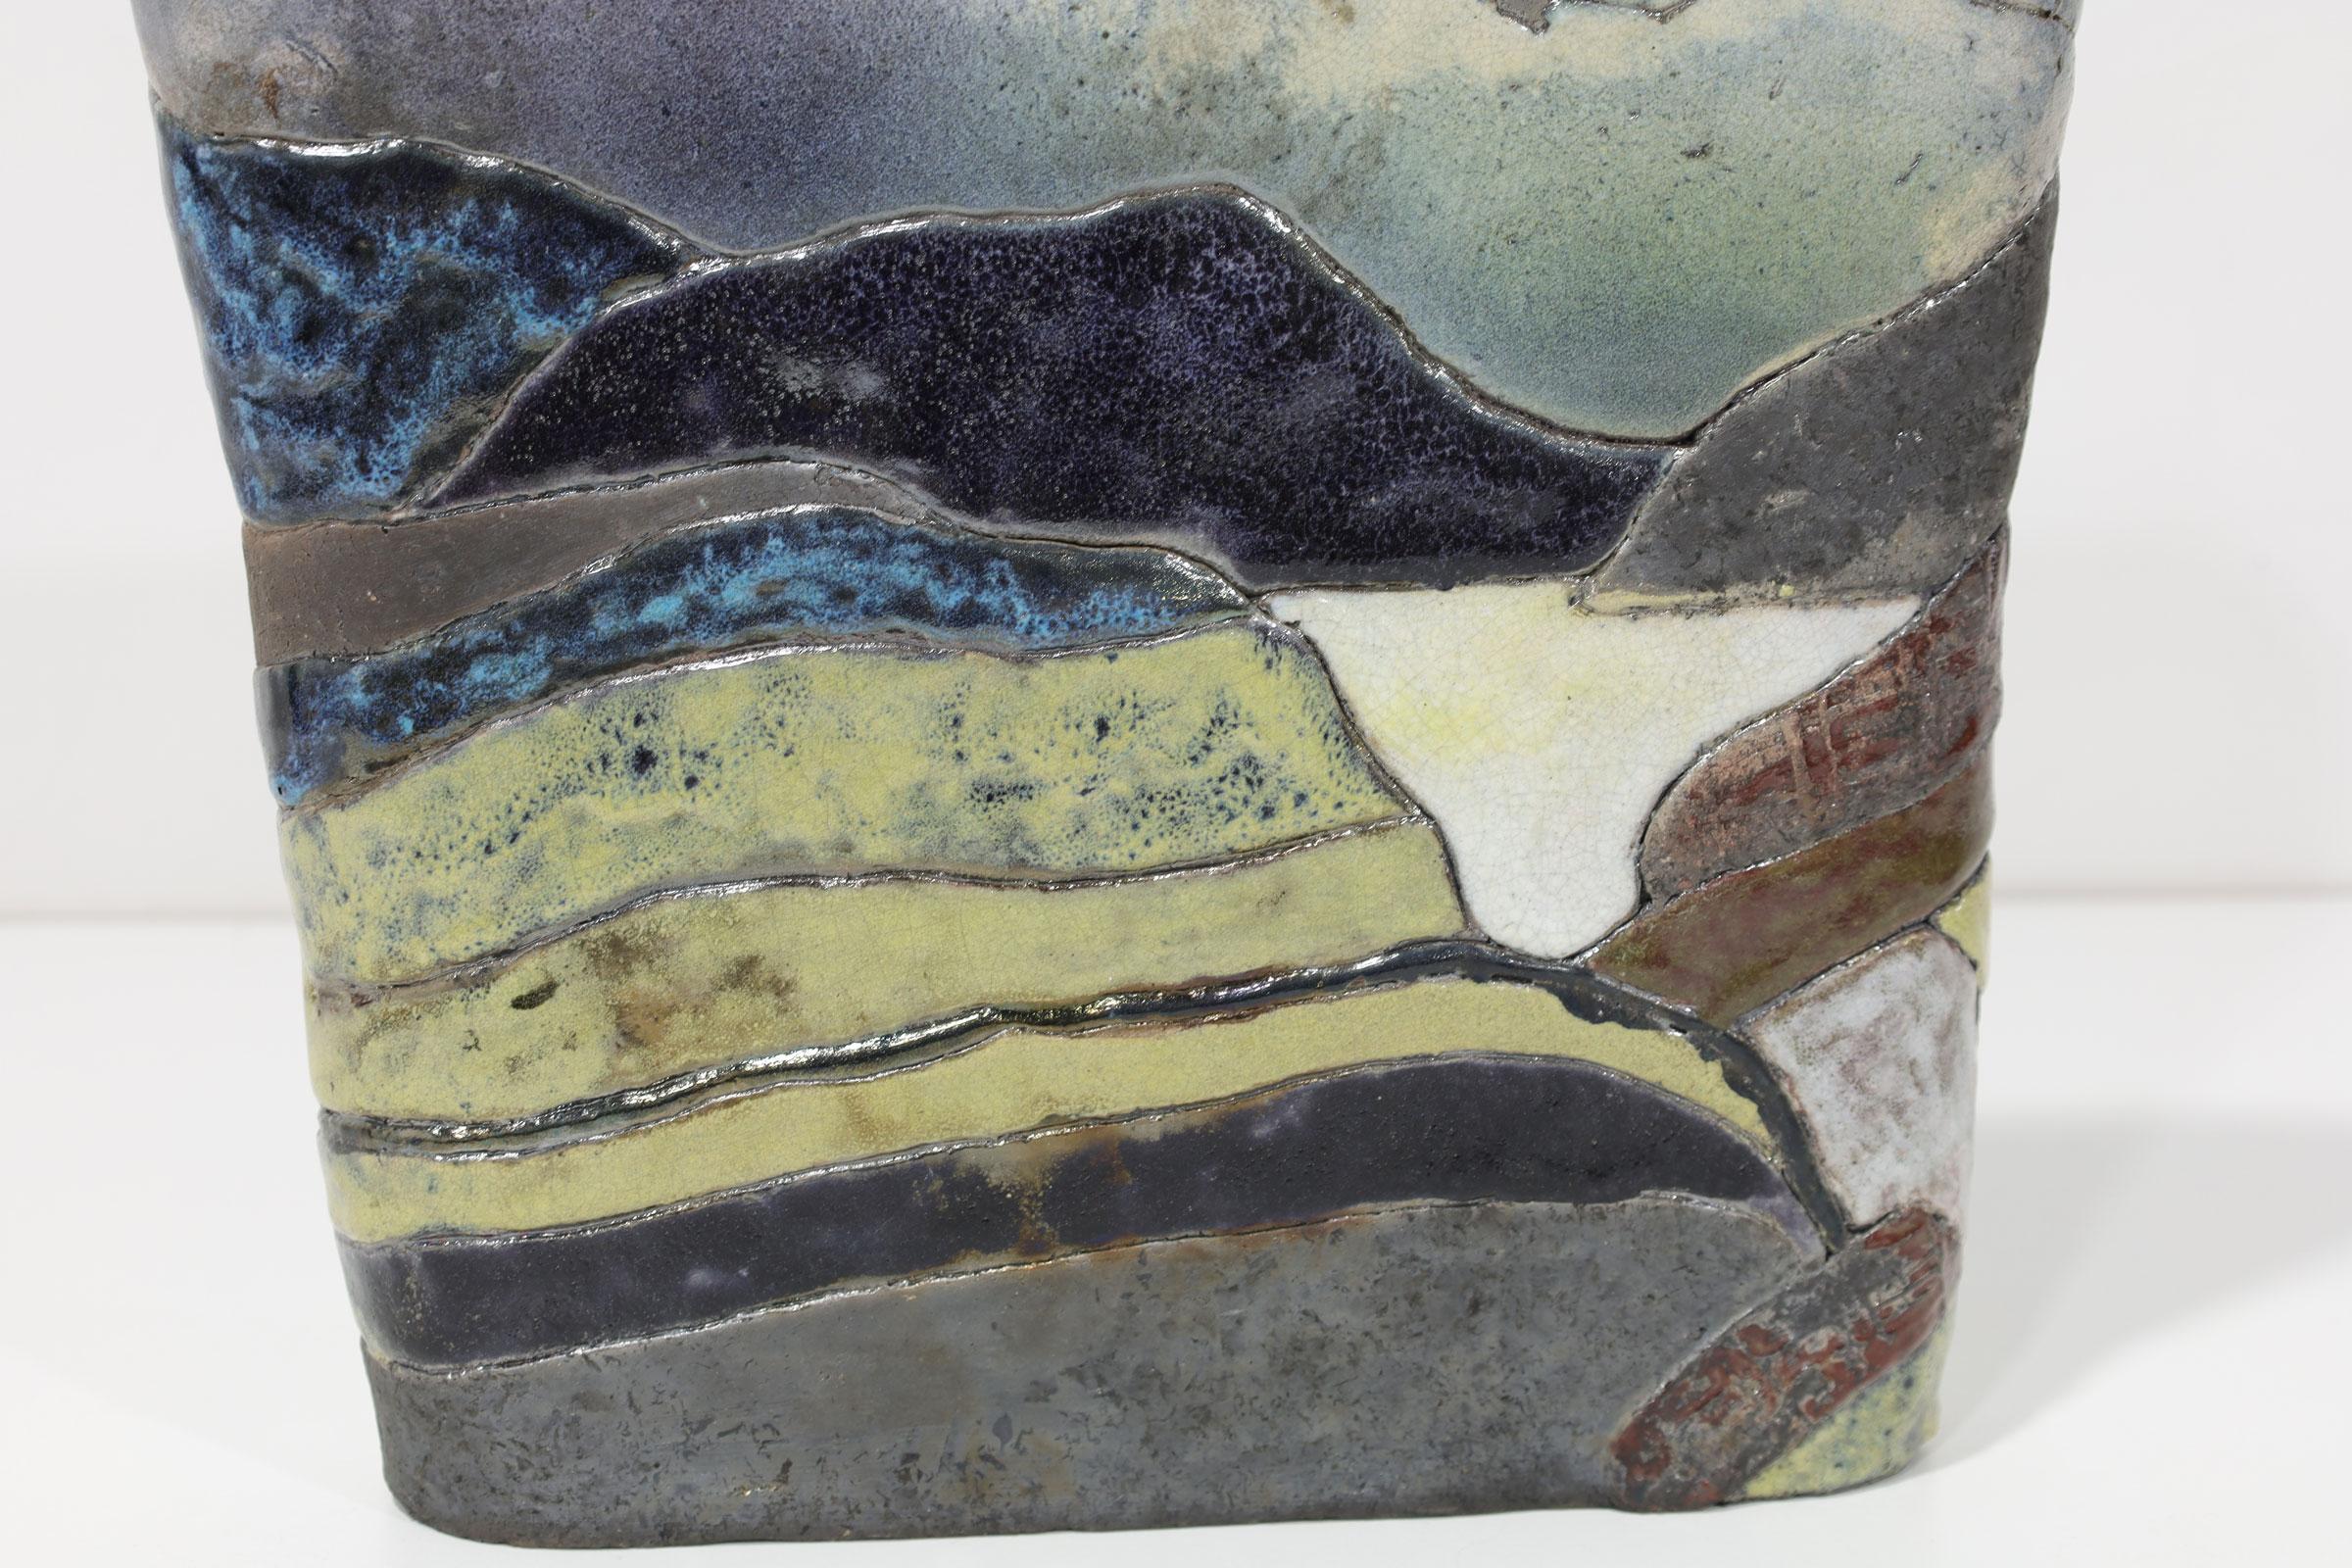 Degener worked in a variety of media - painting, drawing, words - but pottery was her great love. She won numerous awards for her ceramics beginning with the Young Americans competition in 1953. Her work was exhibited at the St. Louis Art Museum.